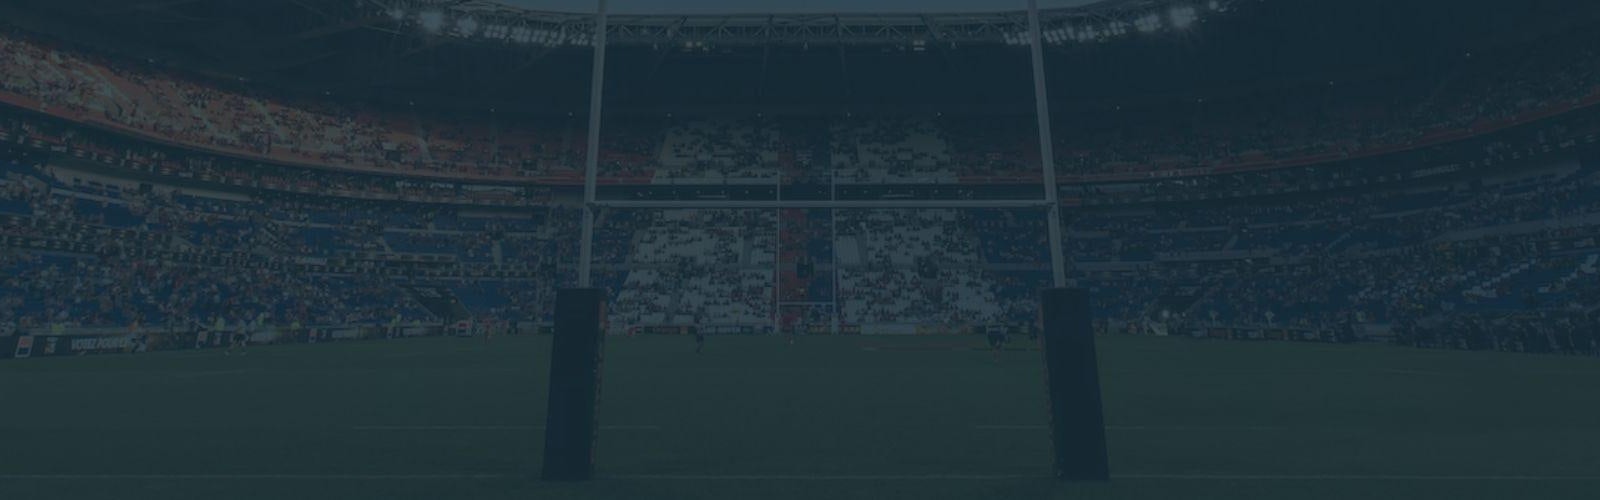 Six nations betting offers header image showing rugby posts